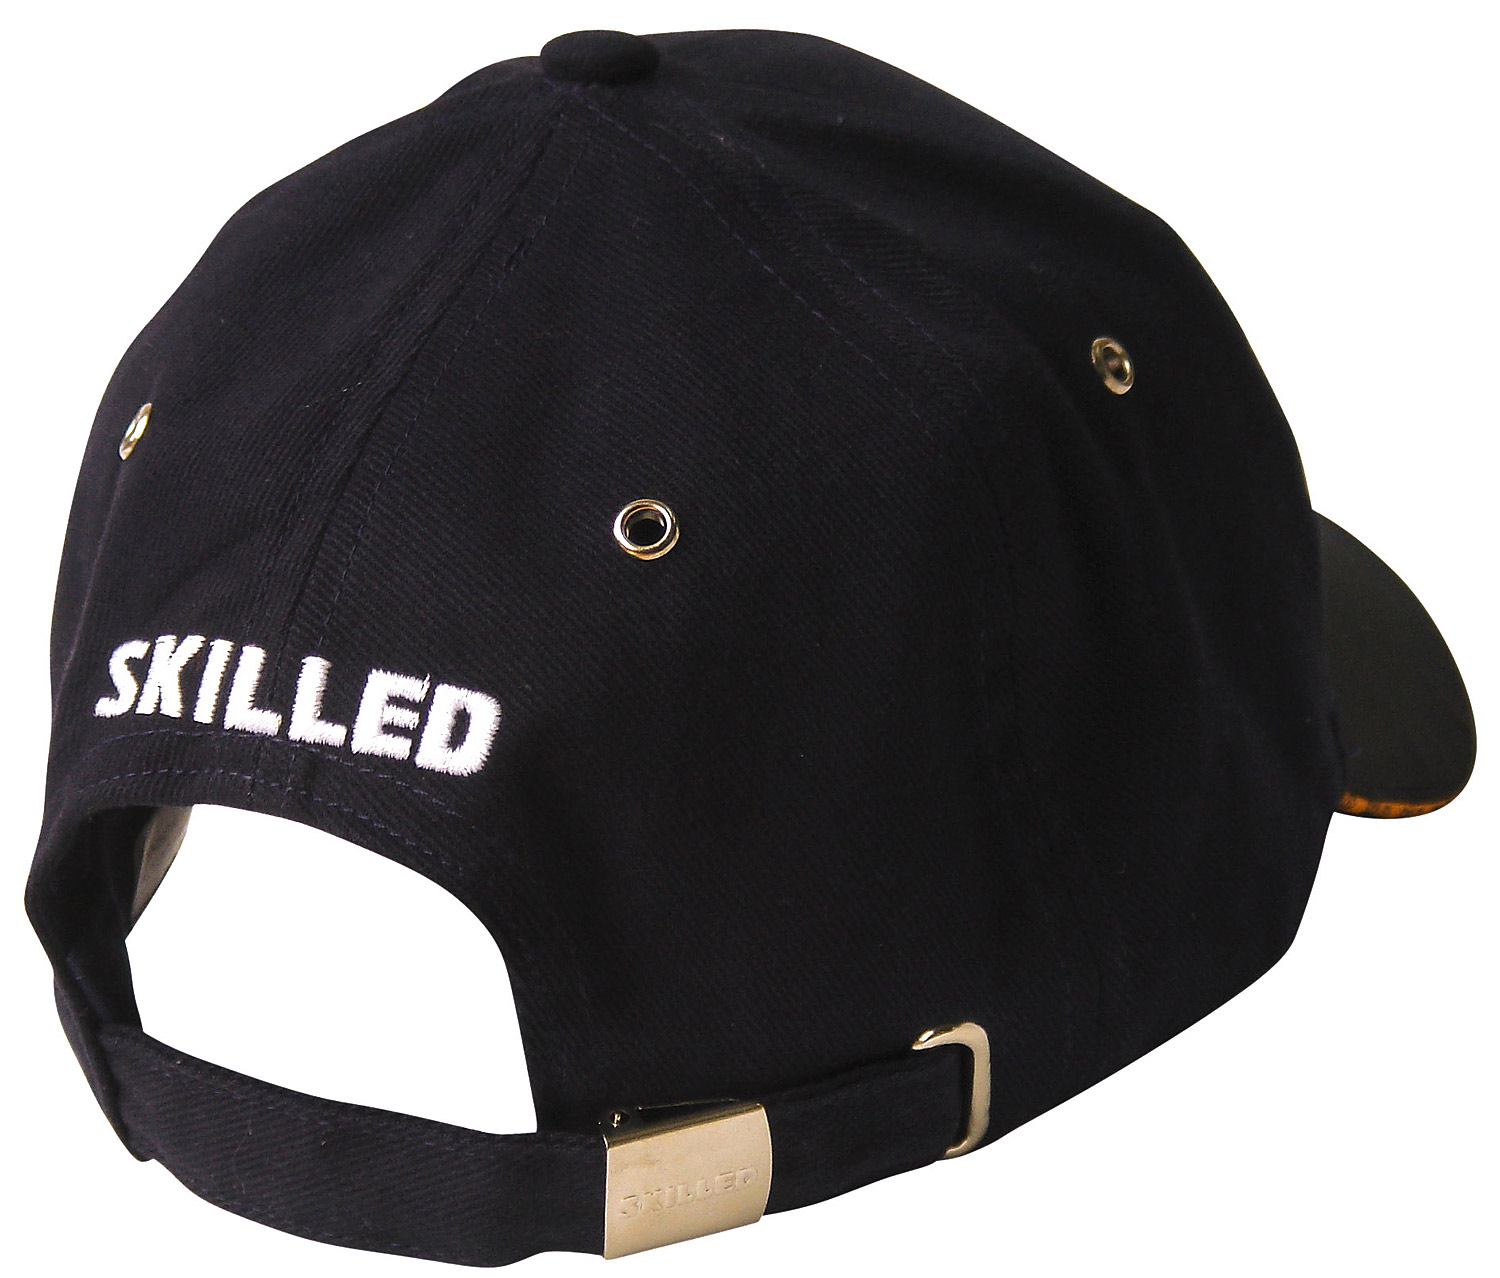 Custom-Made Brushed Cotton Cap With Synthetic Suede Peak (8000 Stitch Count)